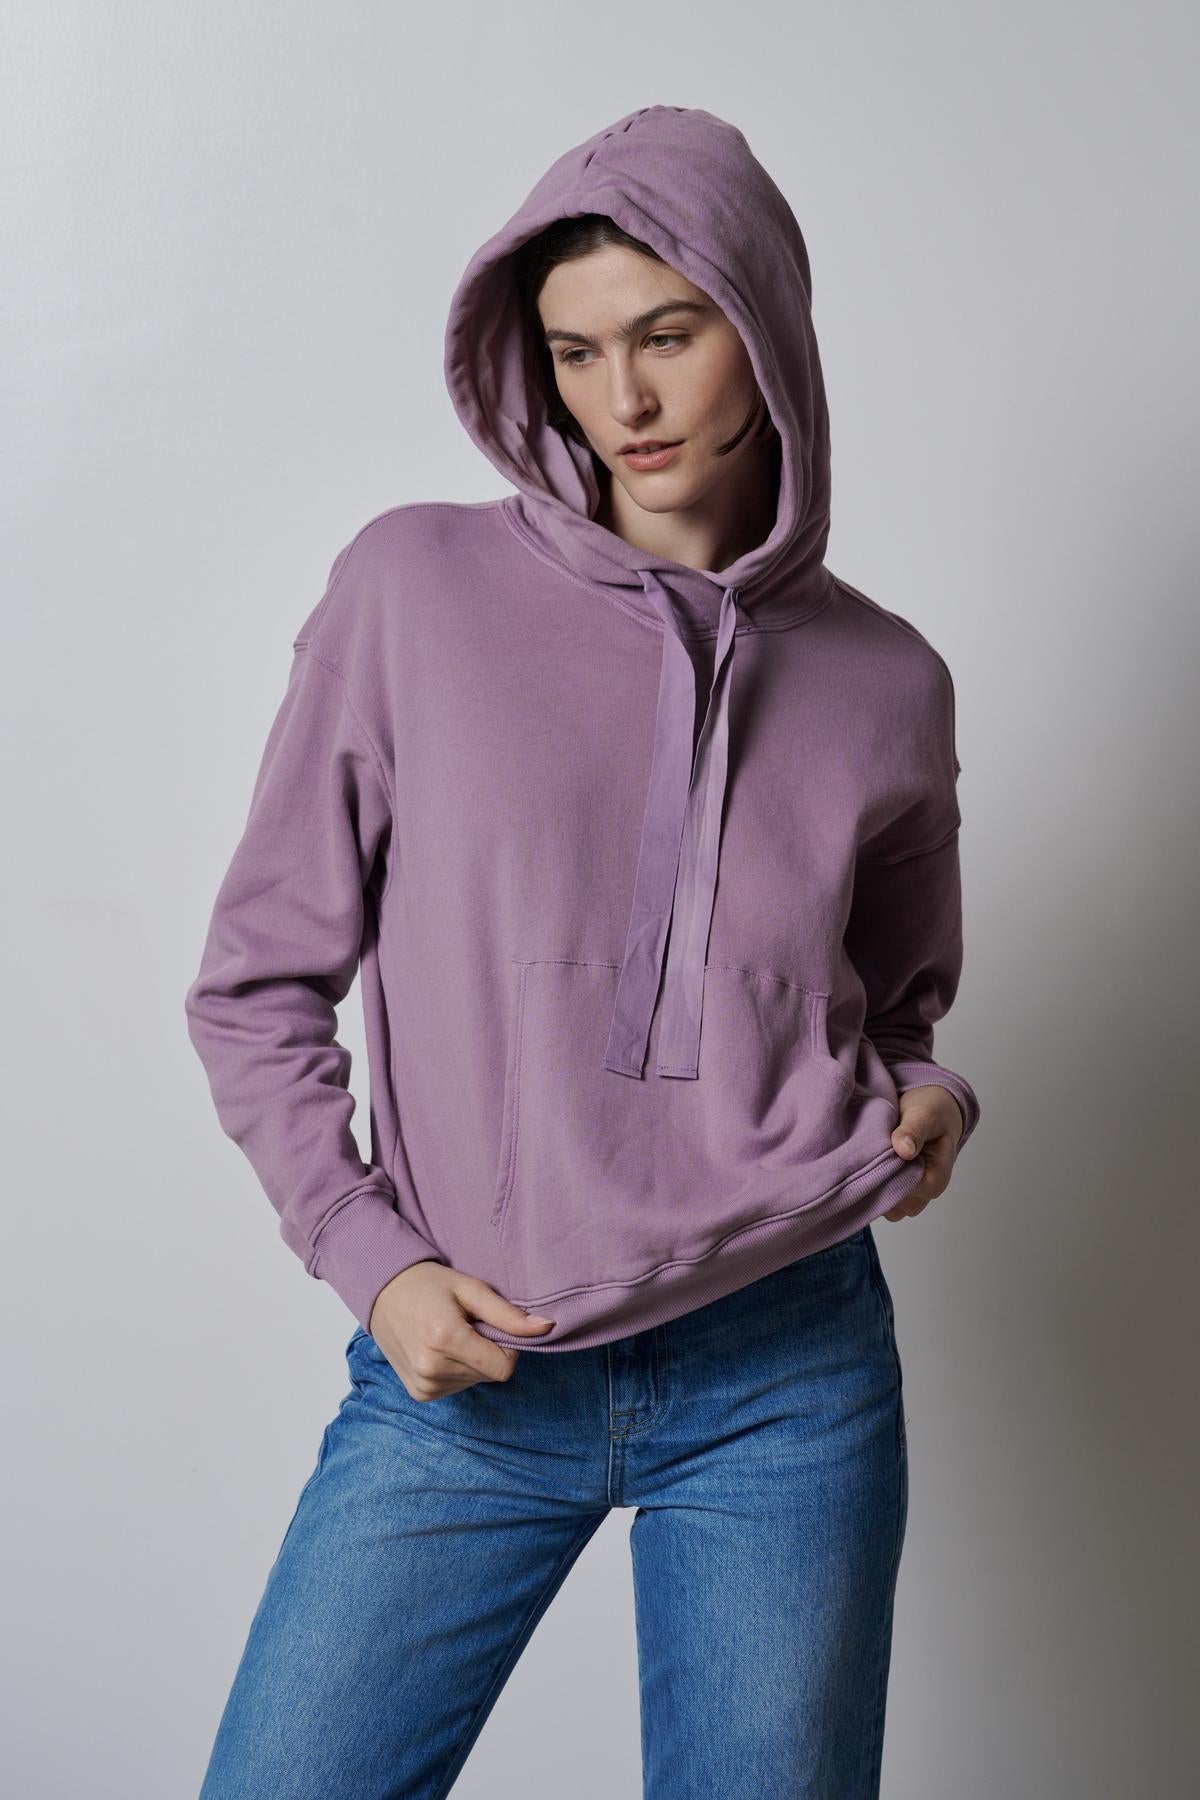 A woman wearing a OJAI HOODIE by Velvet by Jenny Graham and jeans.-35783045447873